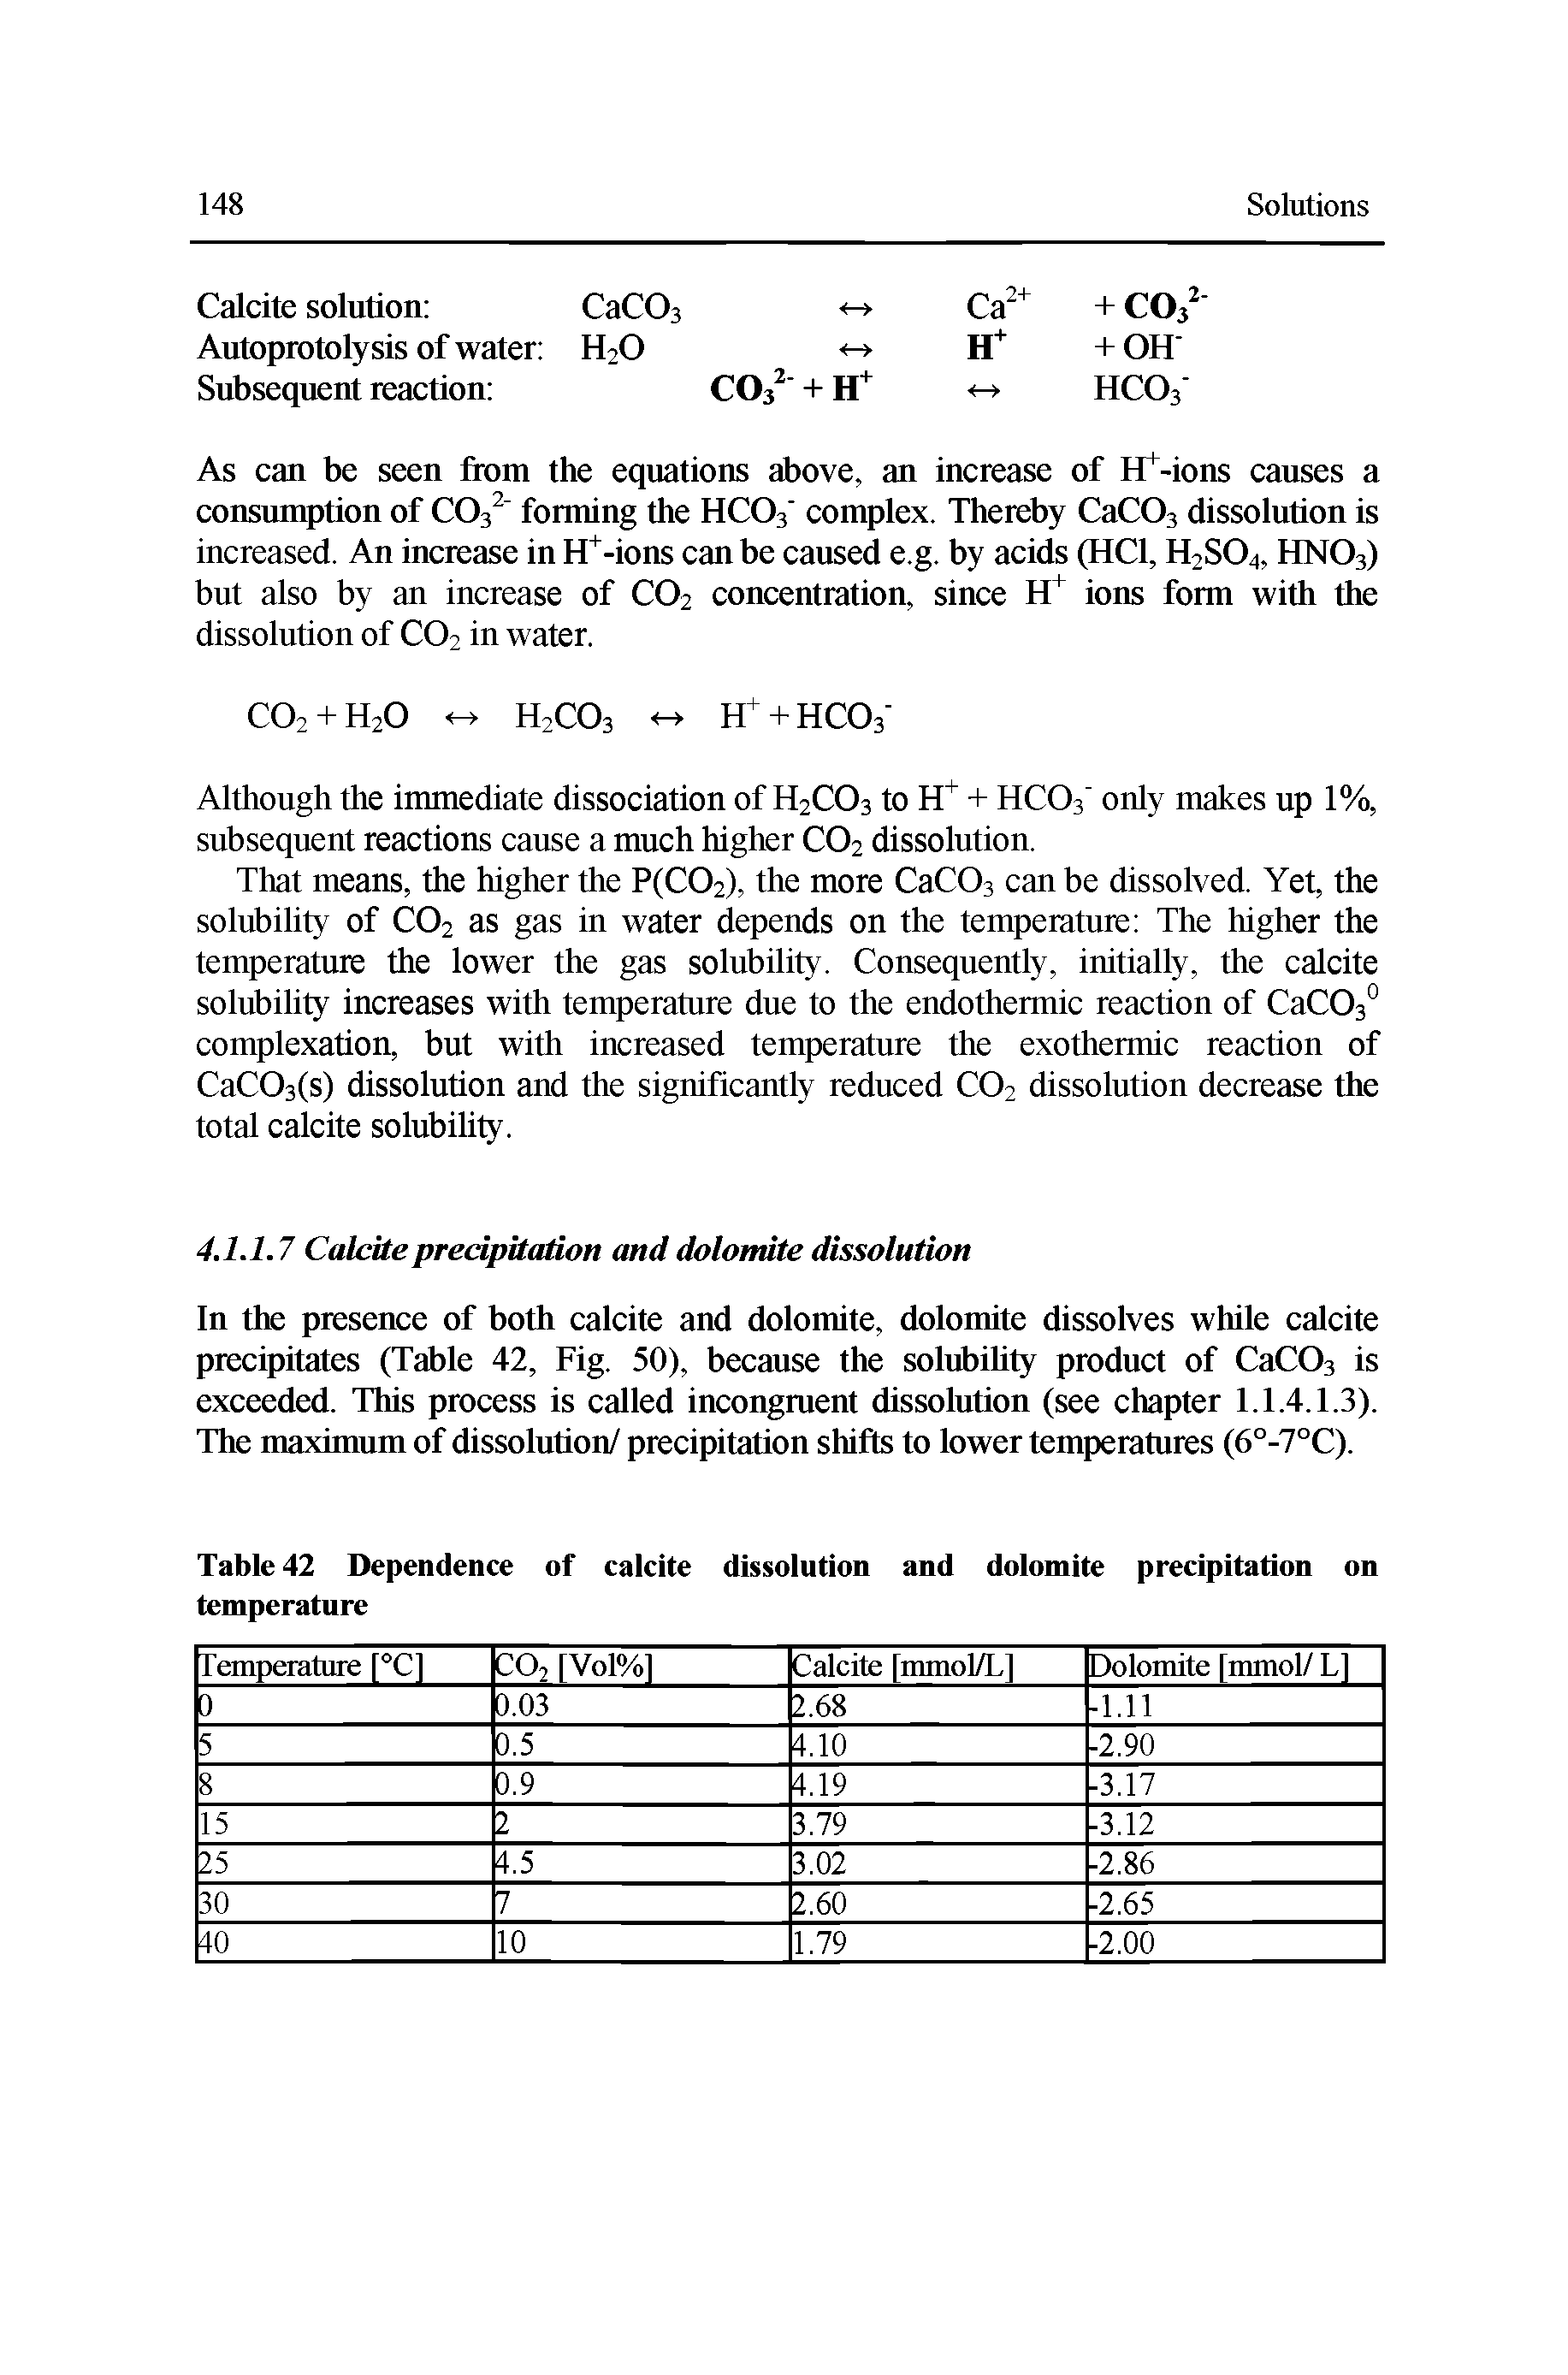 Table 42 Dependence of calcite dissolution and dolomite precipitation on temperature...